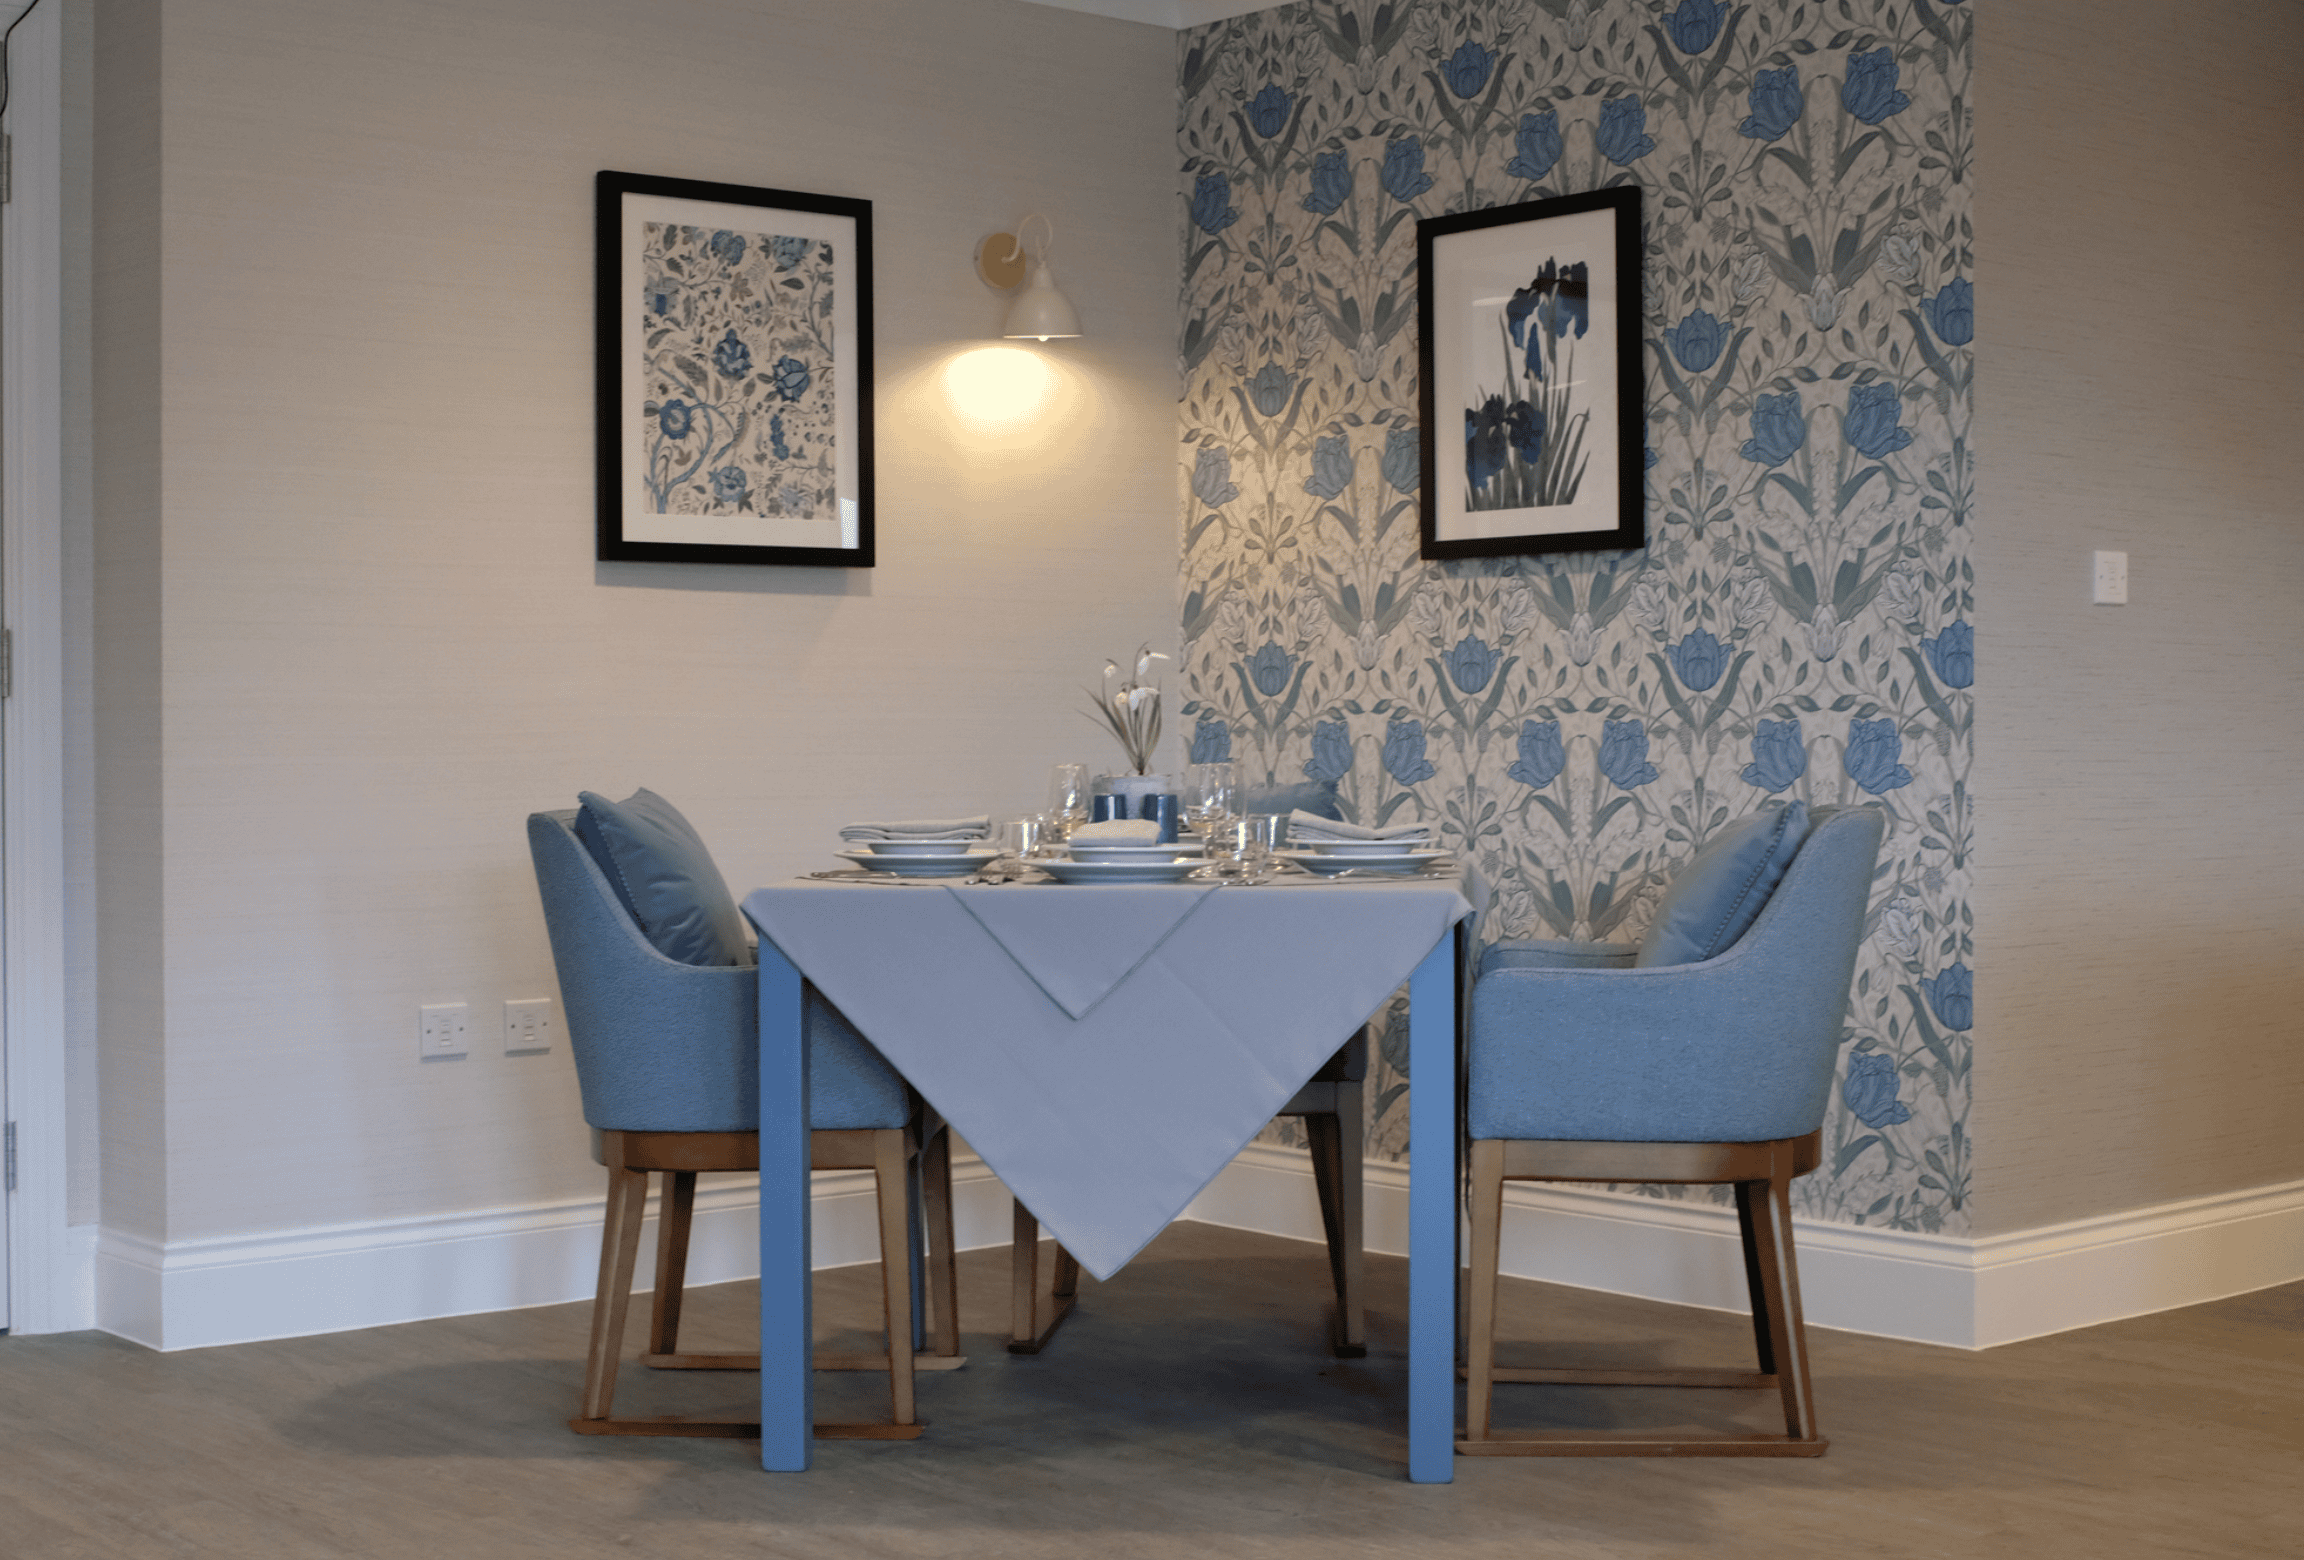 Dining area of Elm View care home in Bishop's Storford, Hertfordshire